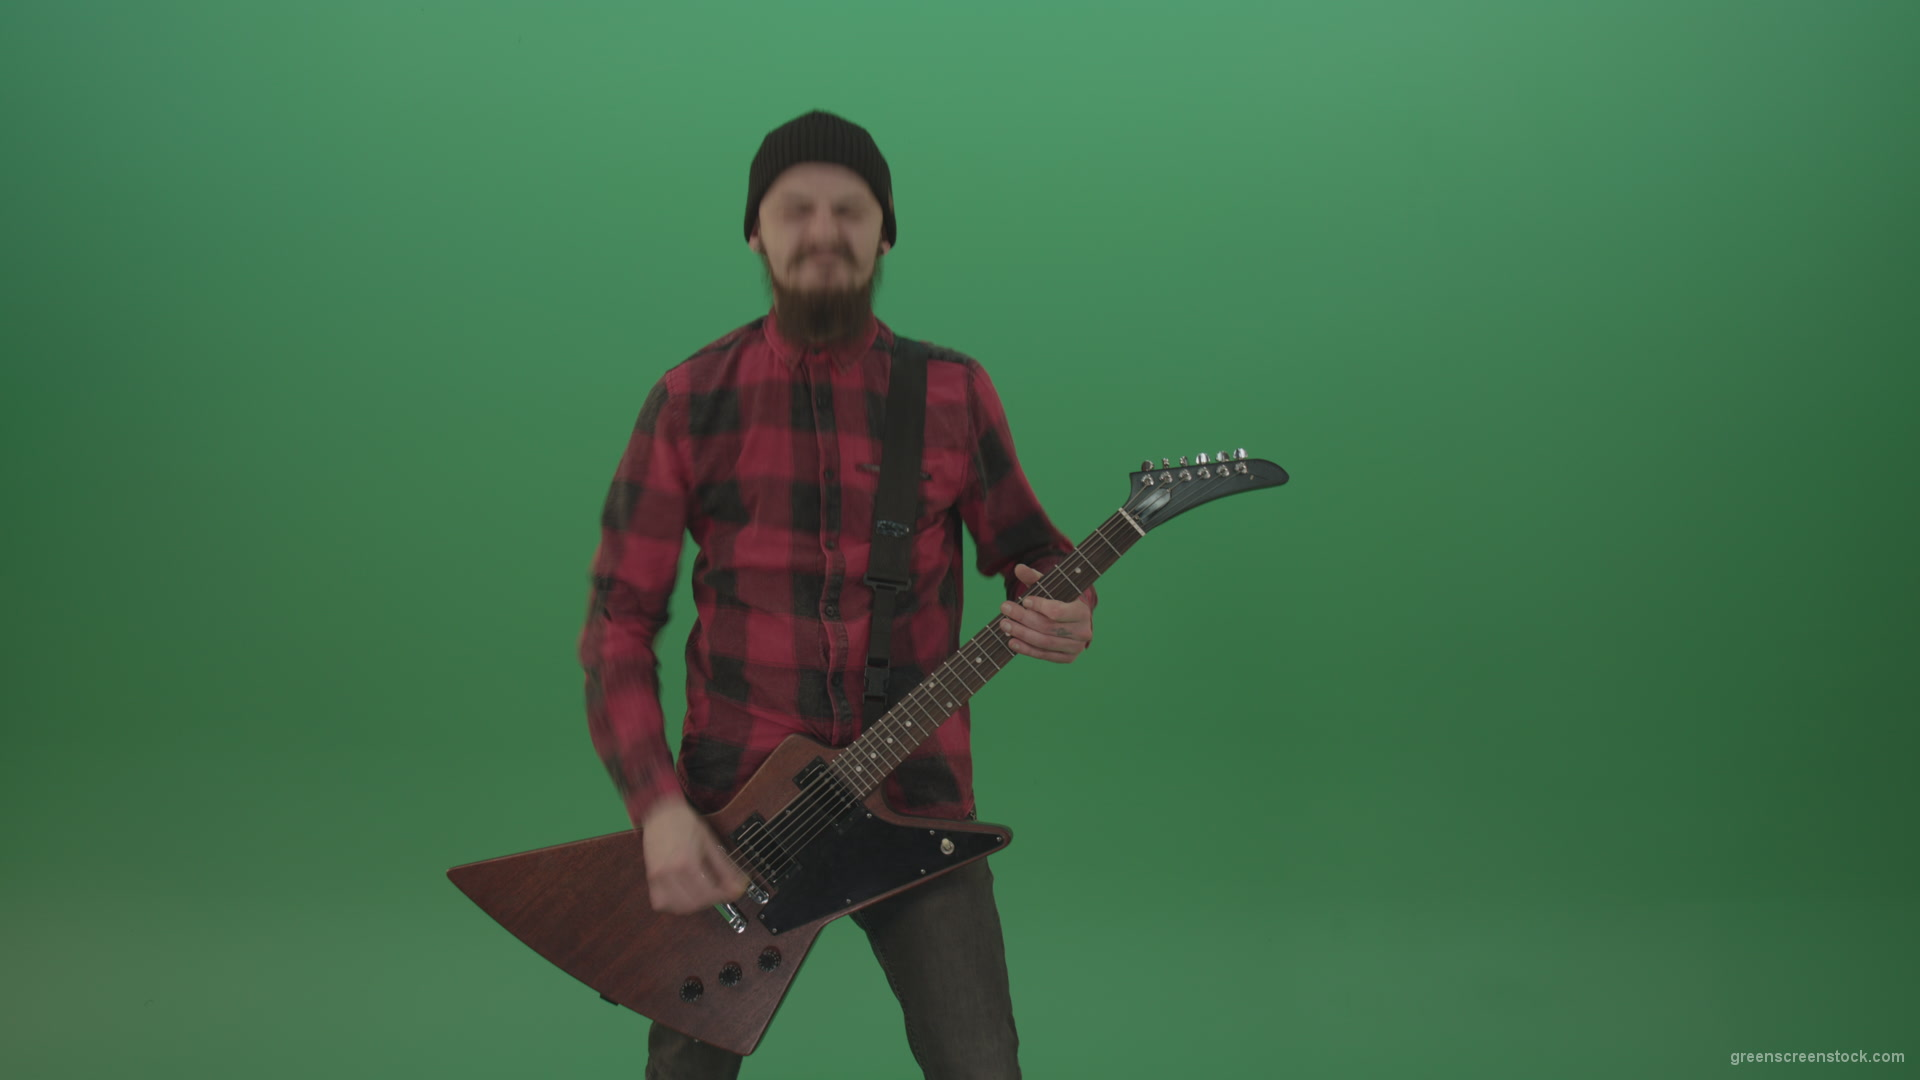 Old-man-with-beard-play-rock-guitar-isolated-on-green-screen-background-4K_004 Green Screen Stock